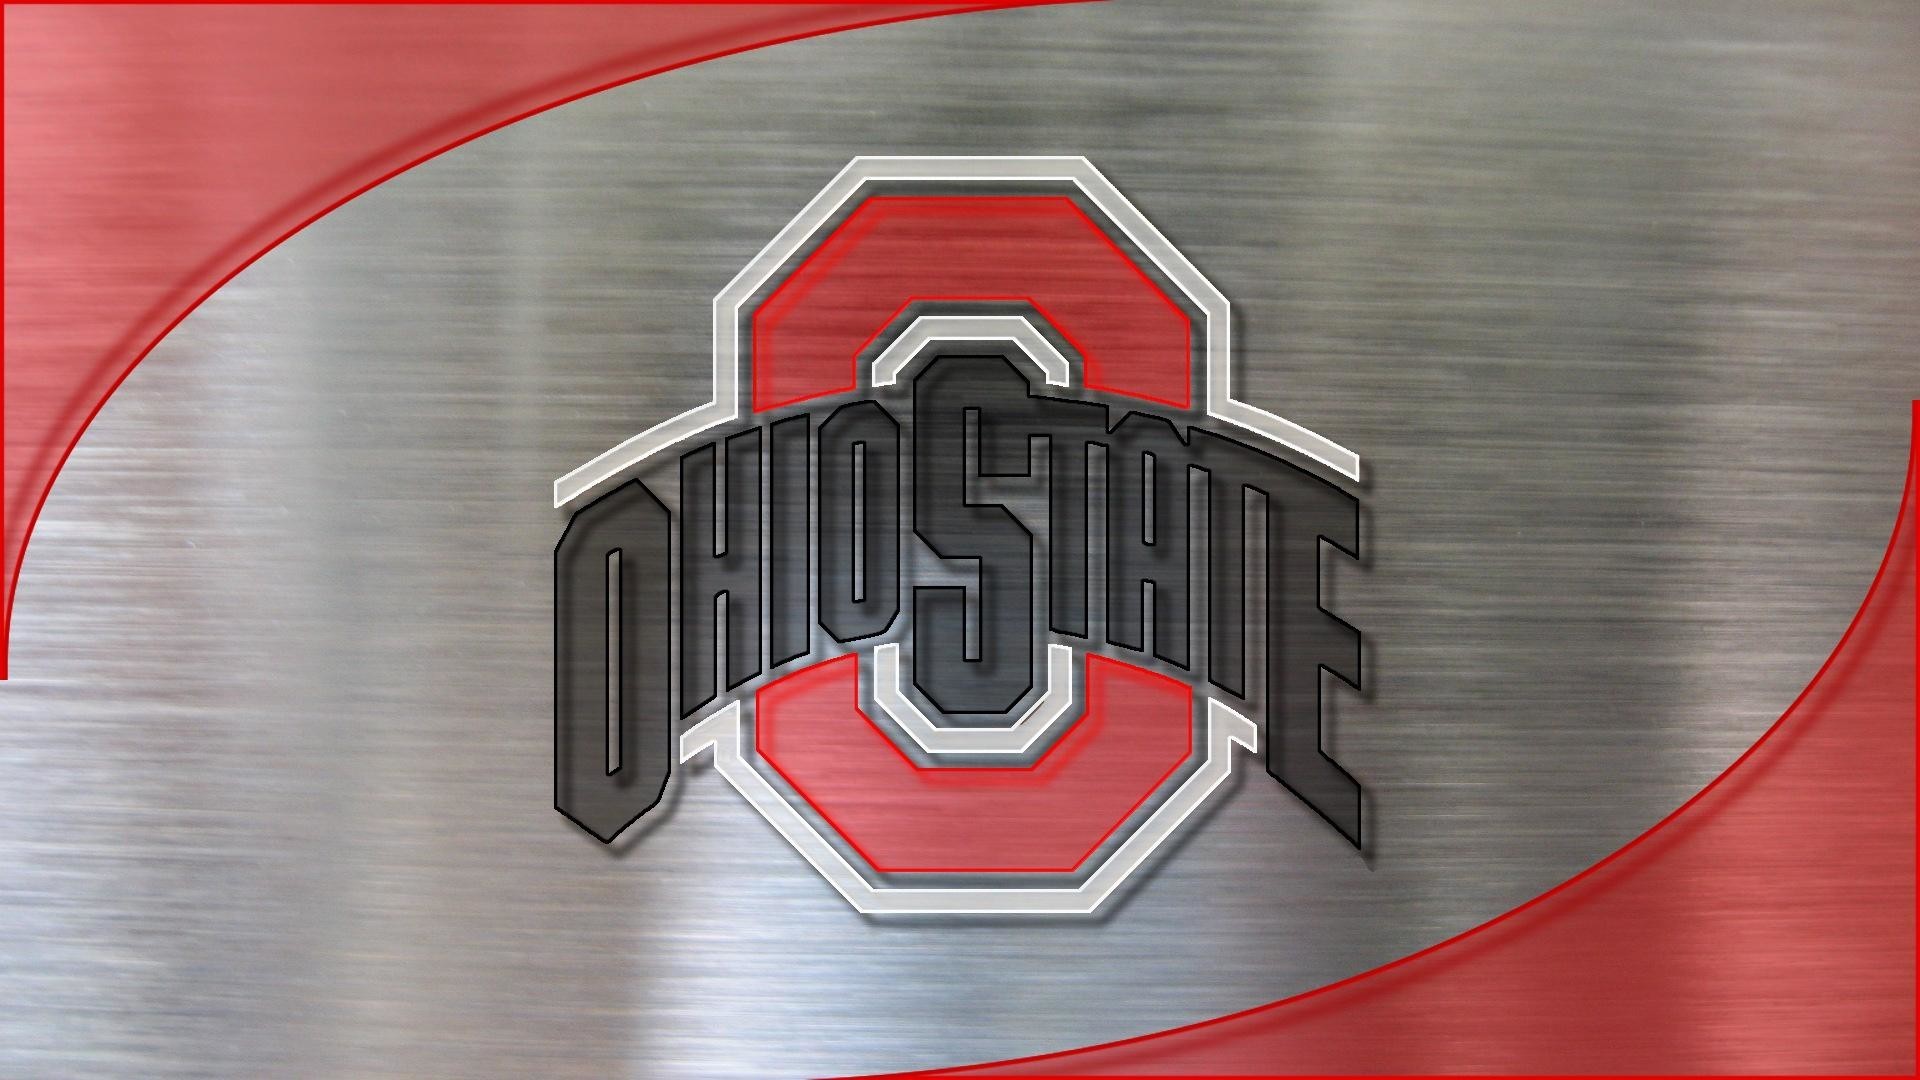 1920x1080  Unique Ohio State Football Logo Pictures 38 On Custom Logo with Ohio  State Football Logo Pictures